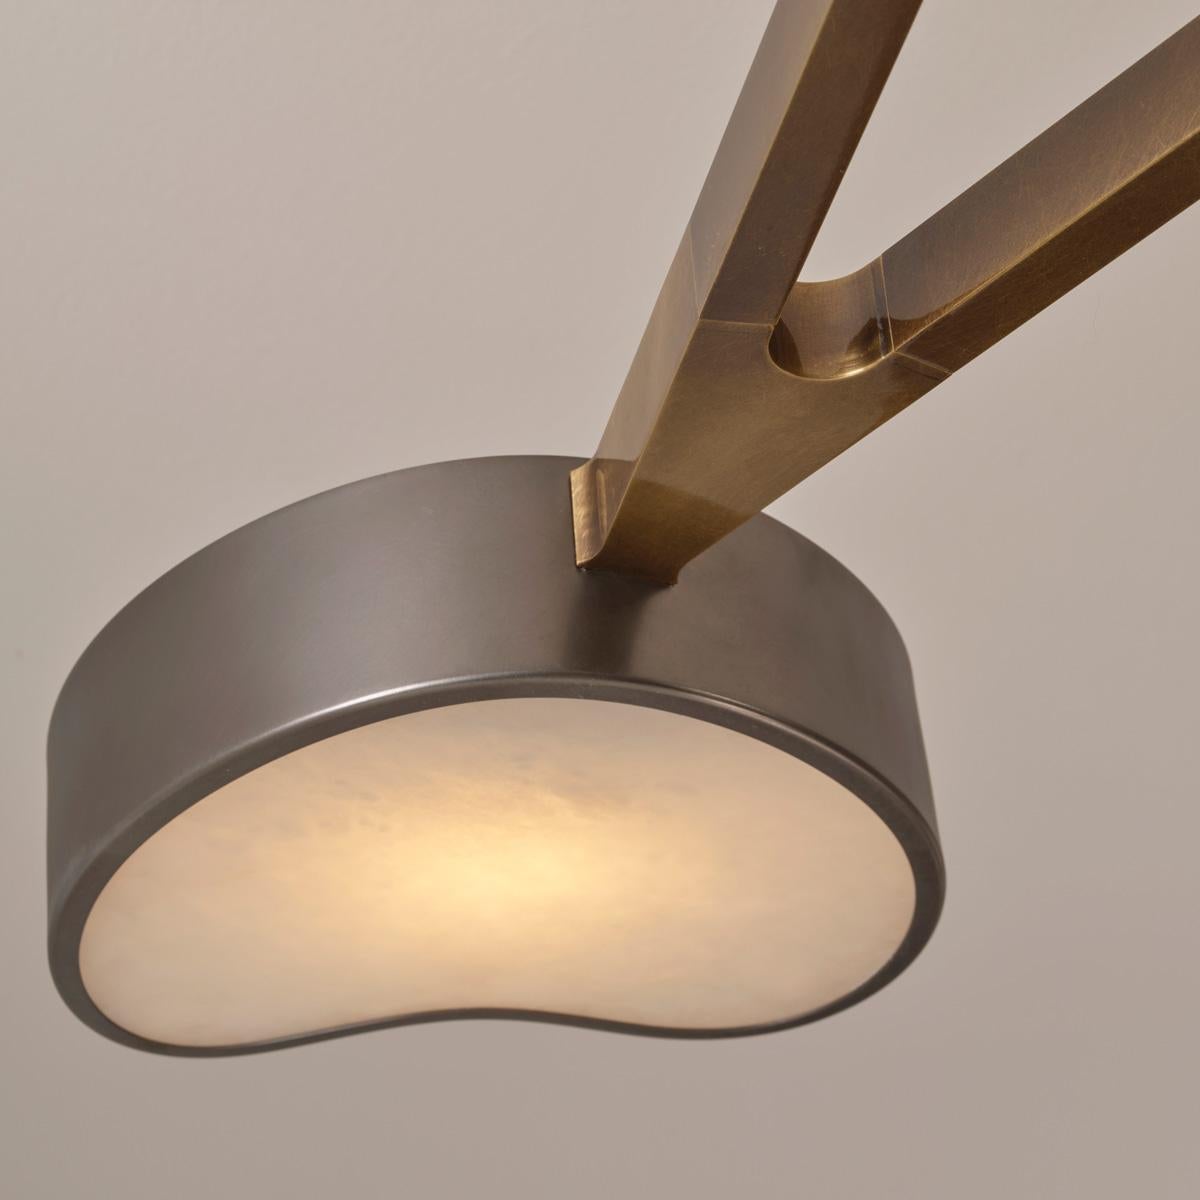 Cuore N.5 Ceiling Light by Gaspare Asaro. Peltro and Bronze Finish For Sale 5